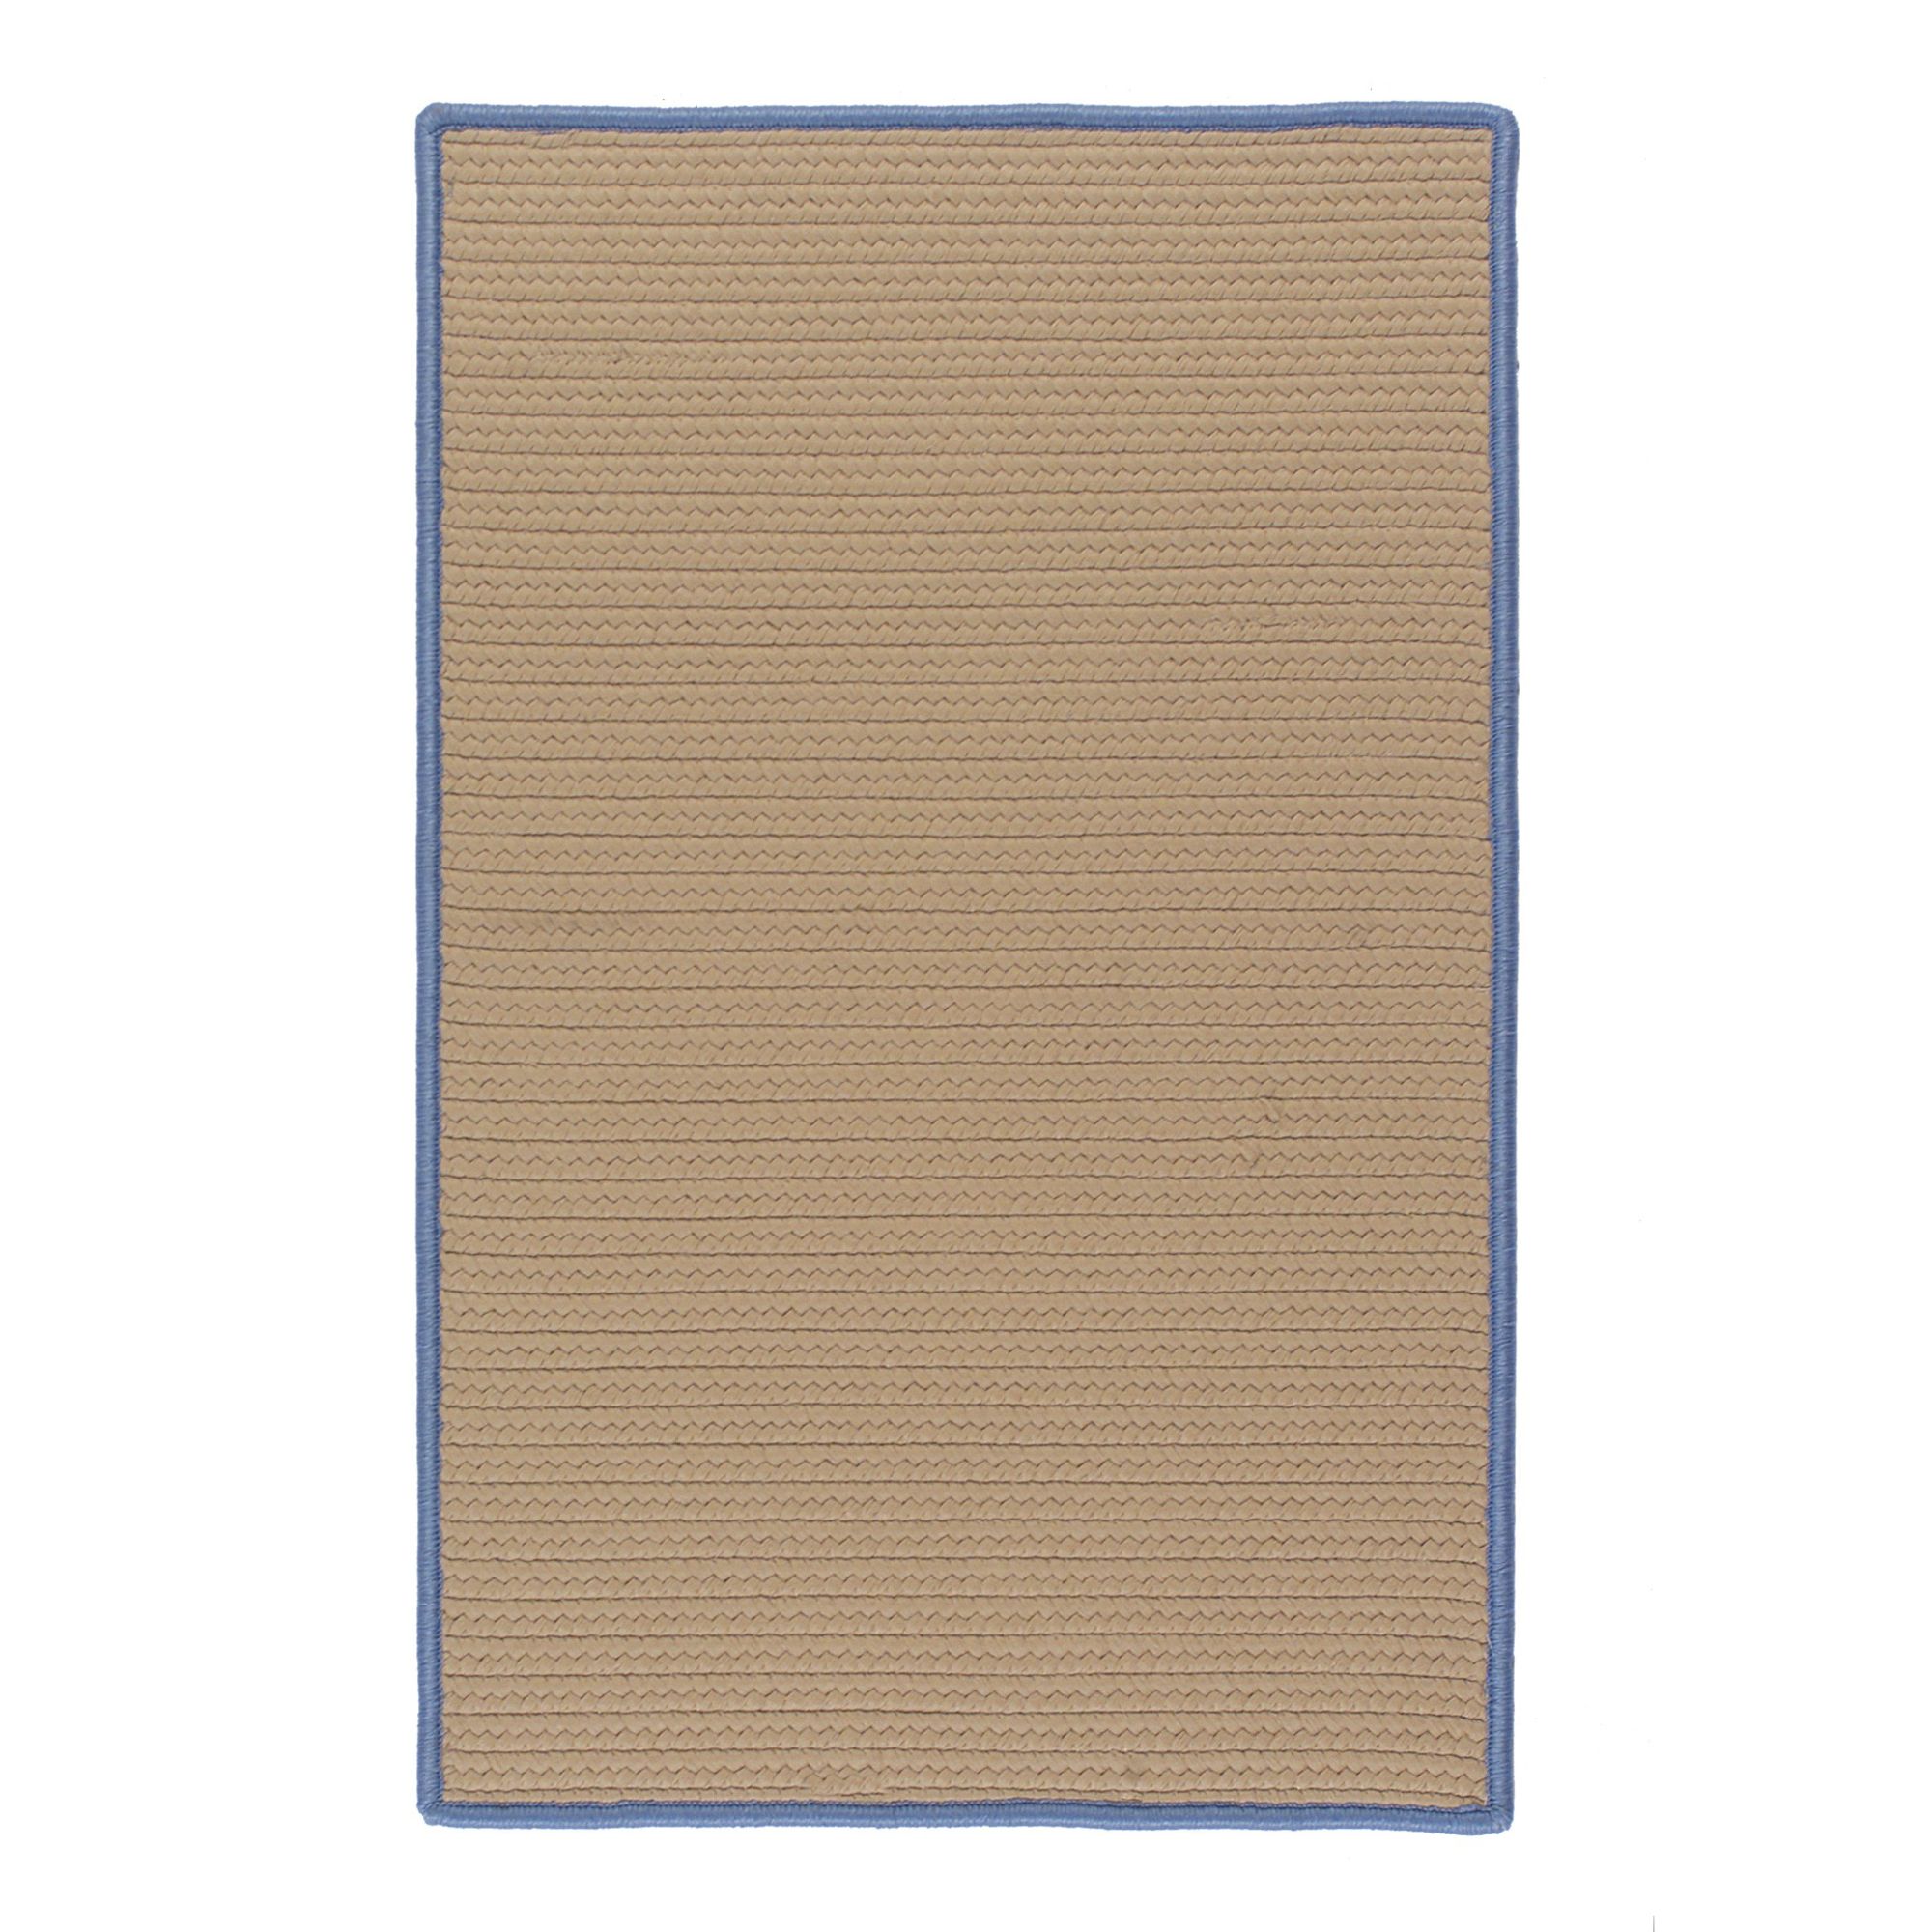 Colonial Mills 2.25' x 3.8' Brown and Blue All Purpose Handcrafted Reversible Rectangular Outdoor Area Throw Rug